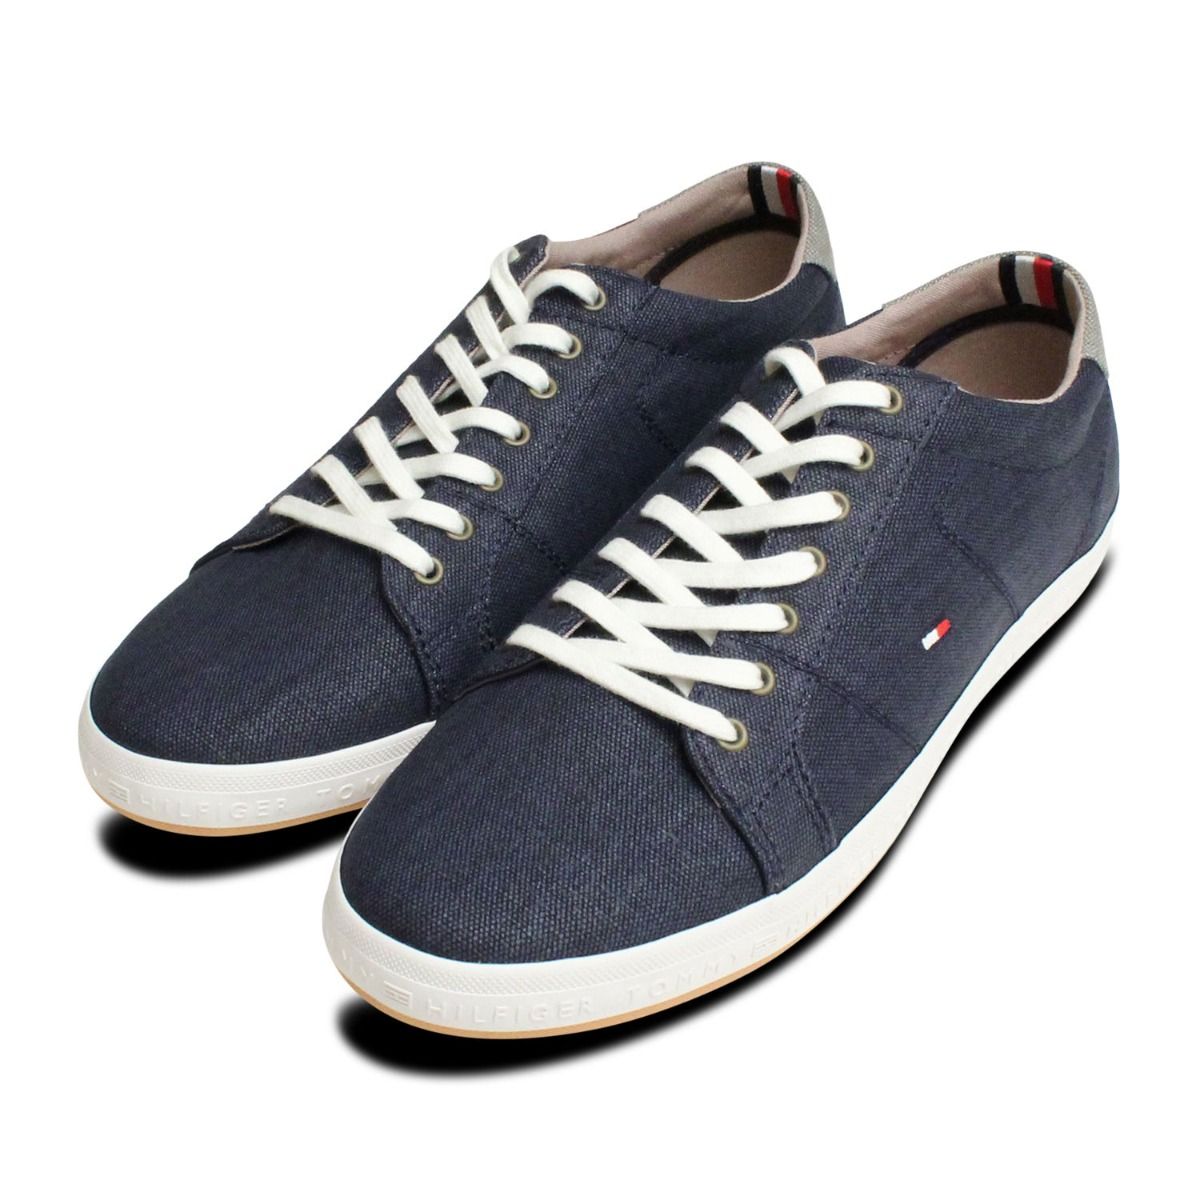 Hilfiger Howell Navy Blue Trainers